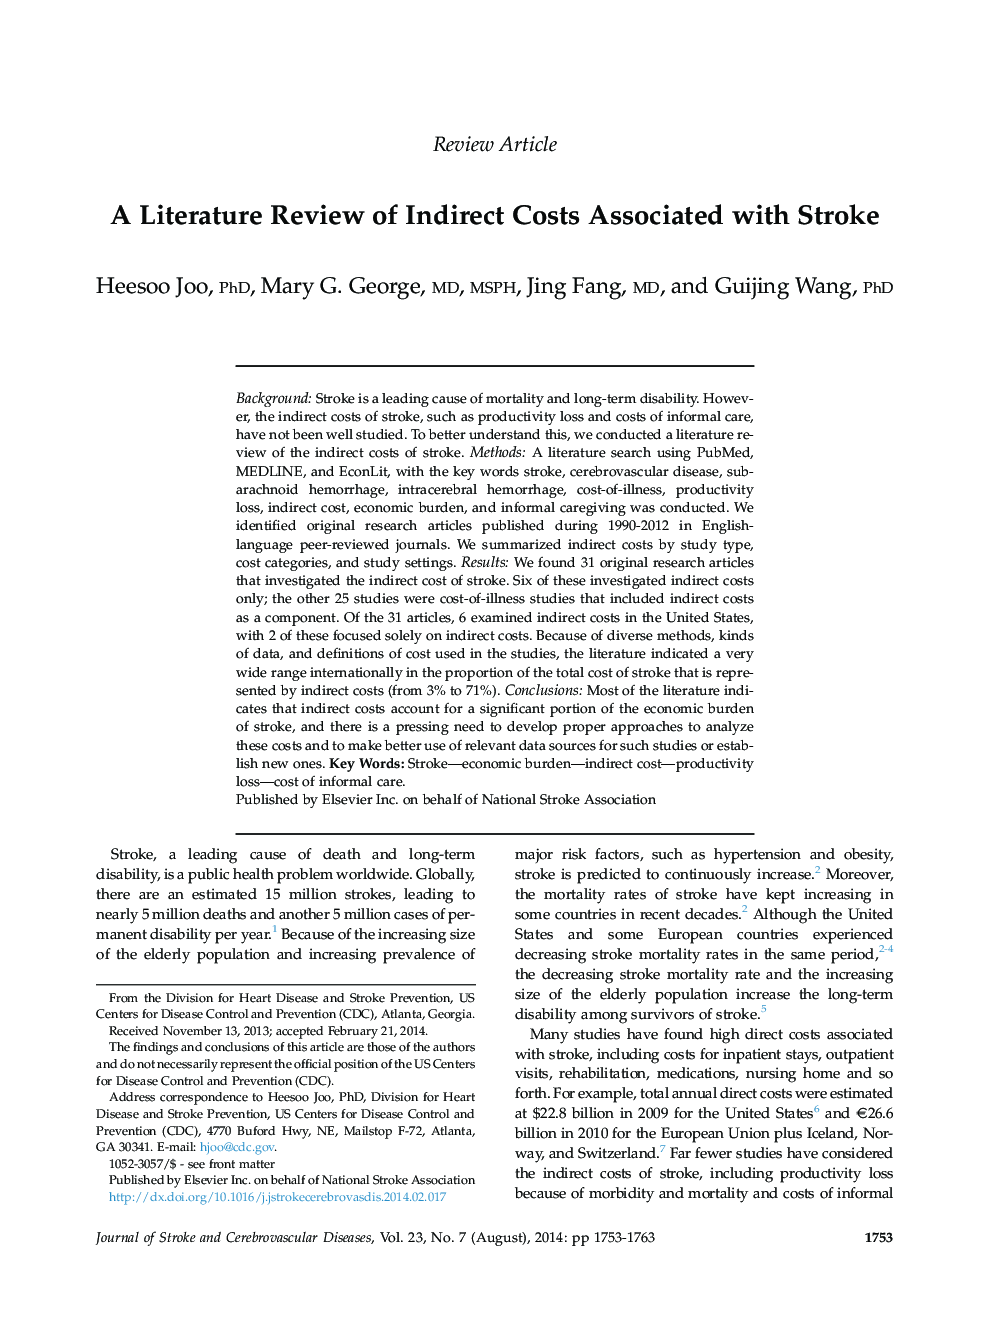 A Literature Review of Indirect Costs Associated with Stroke